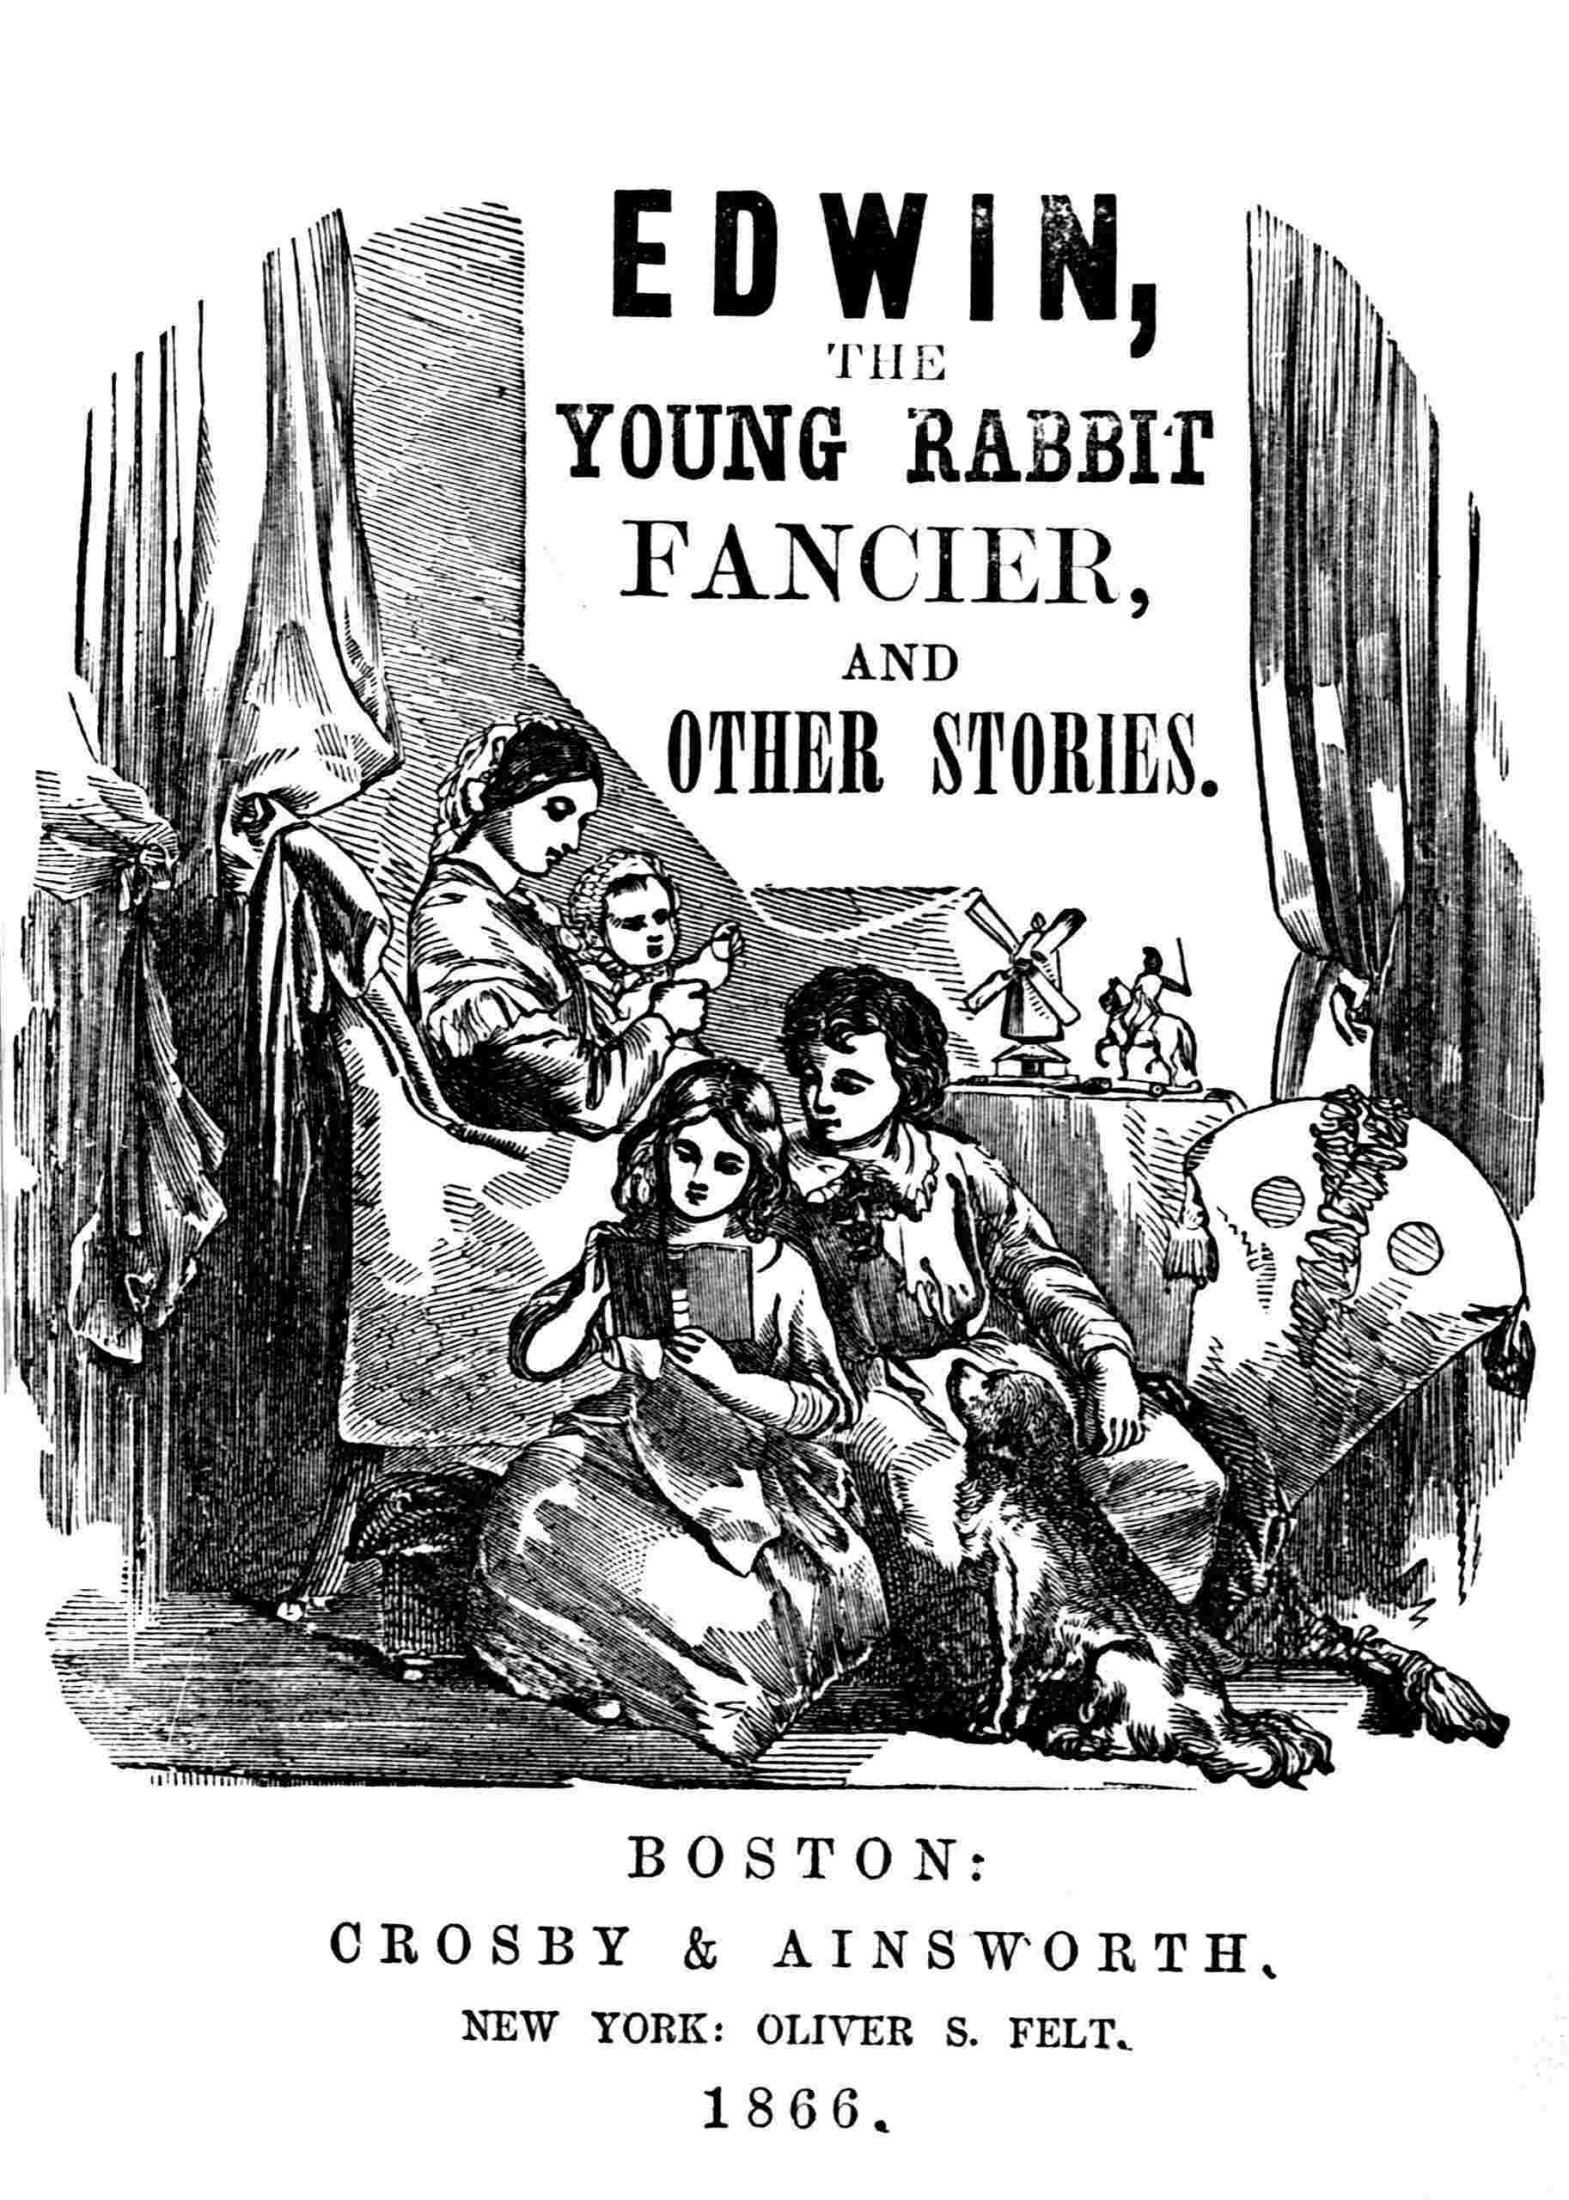 Edwin, the Young Rabbit Fancier: And Other Stories